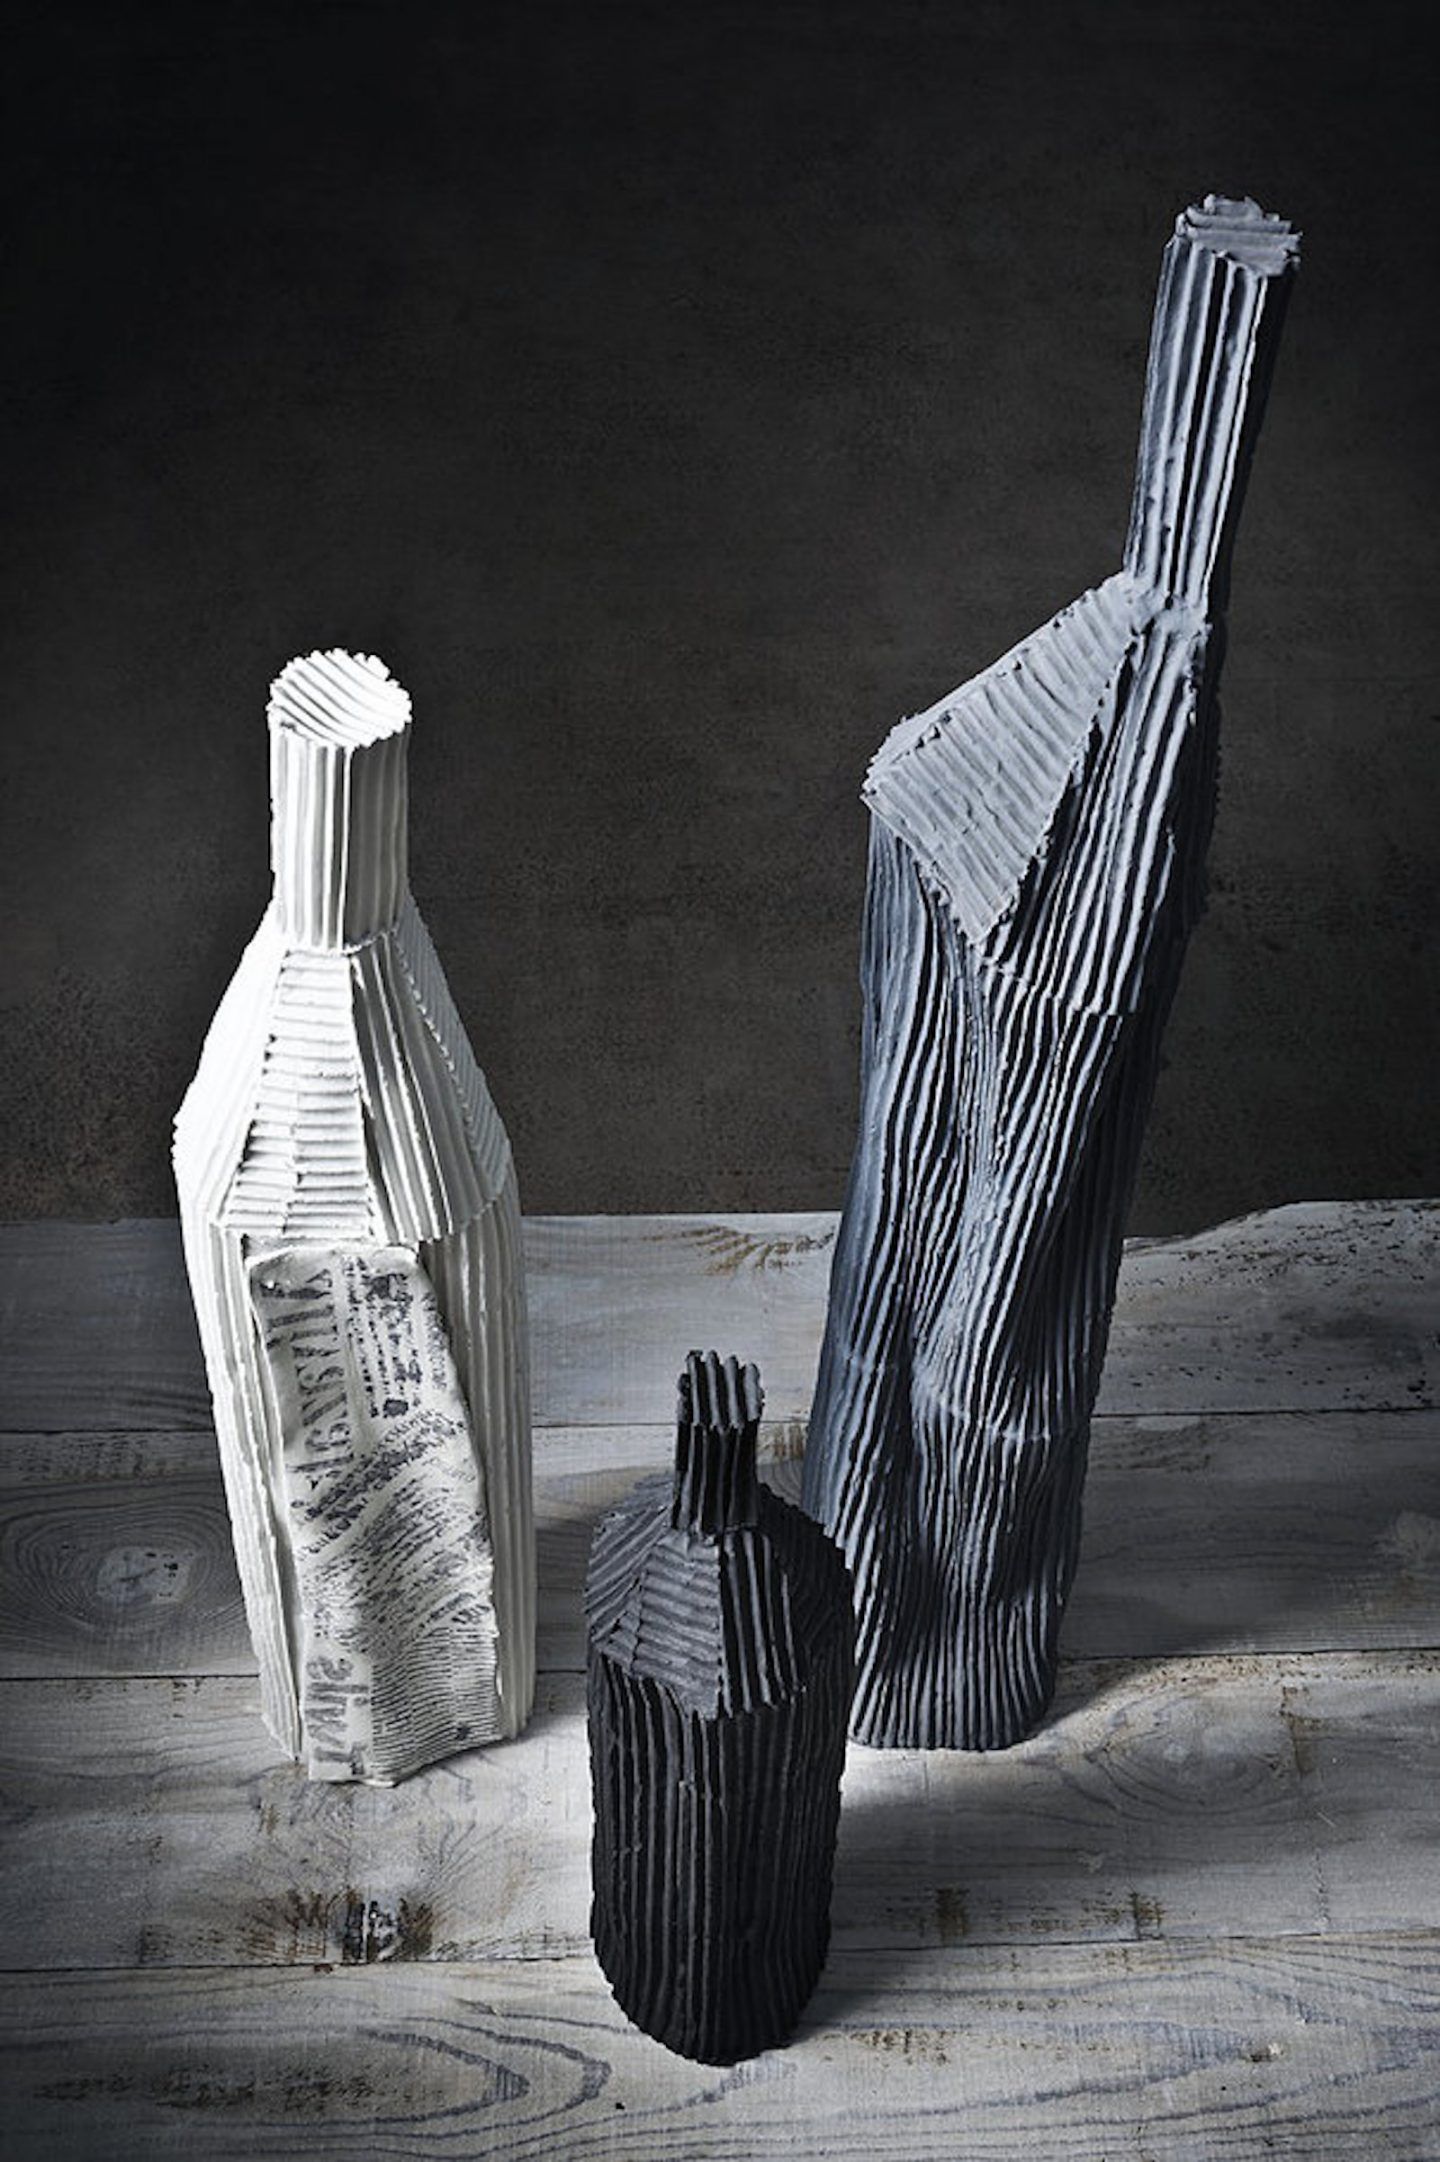 Uniquely Textured Ceramic Sculptures Made From Paper Clay - IGNANT